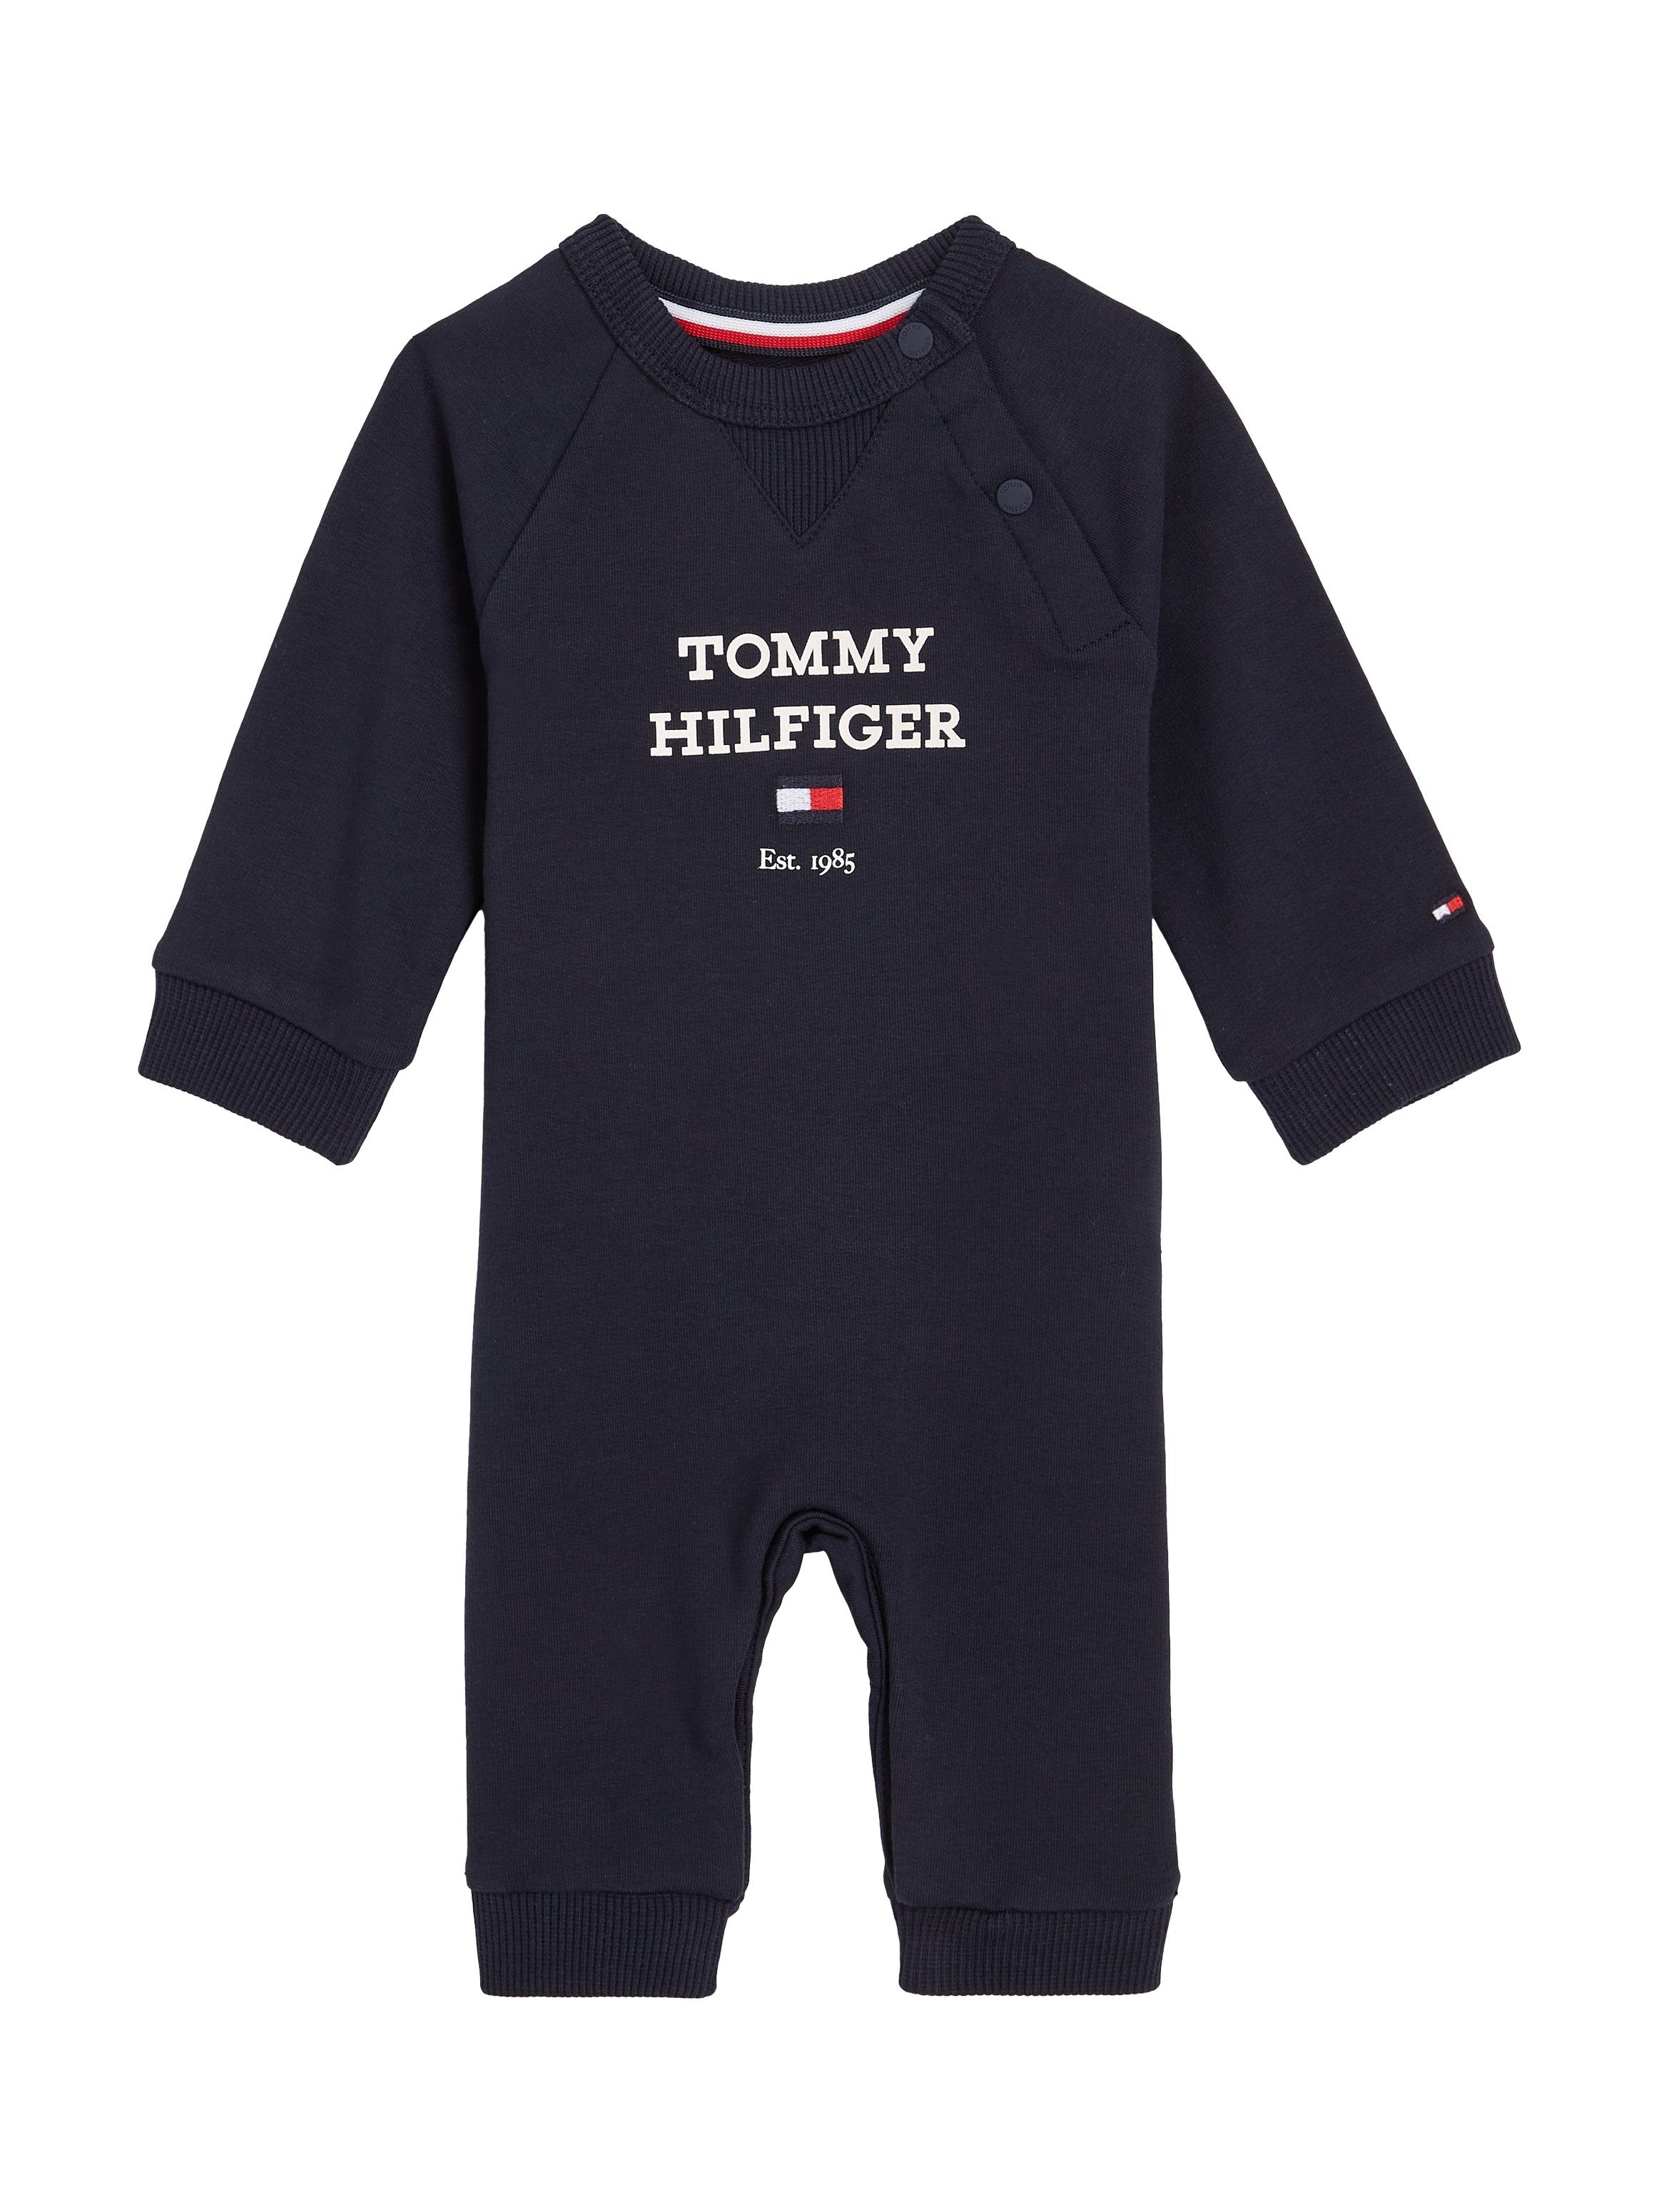 TH LOGO Hilfiger Tommy COVERALL Overall BABY